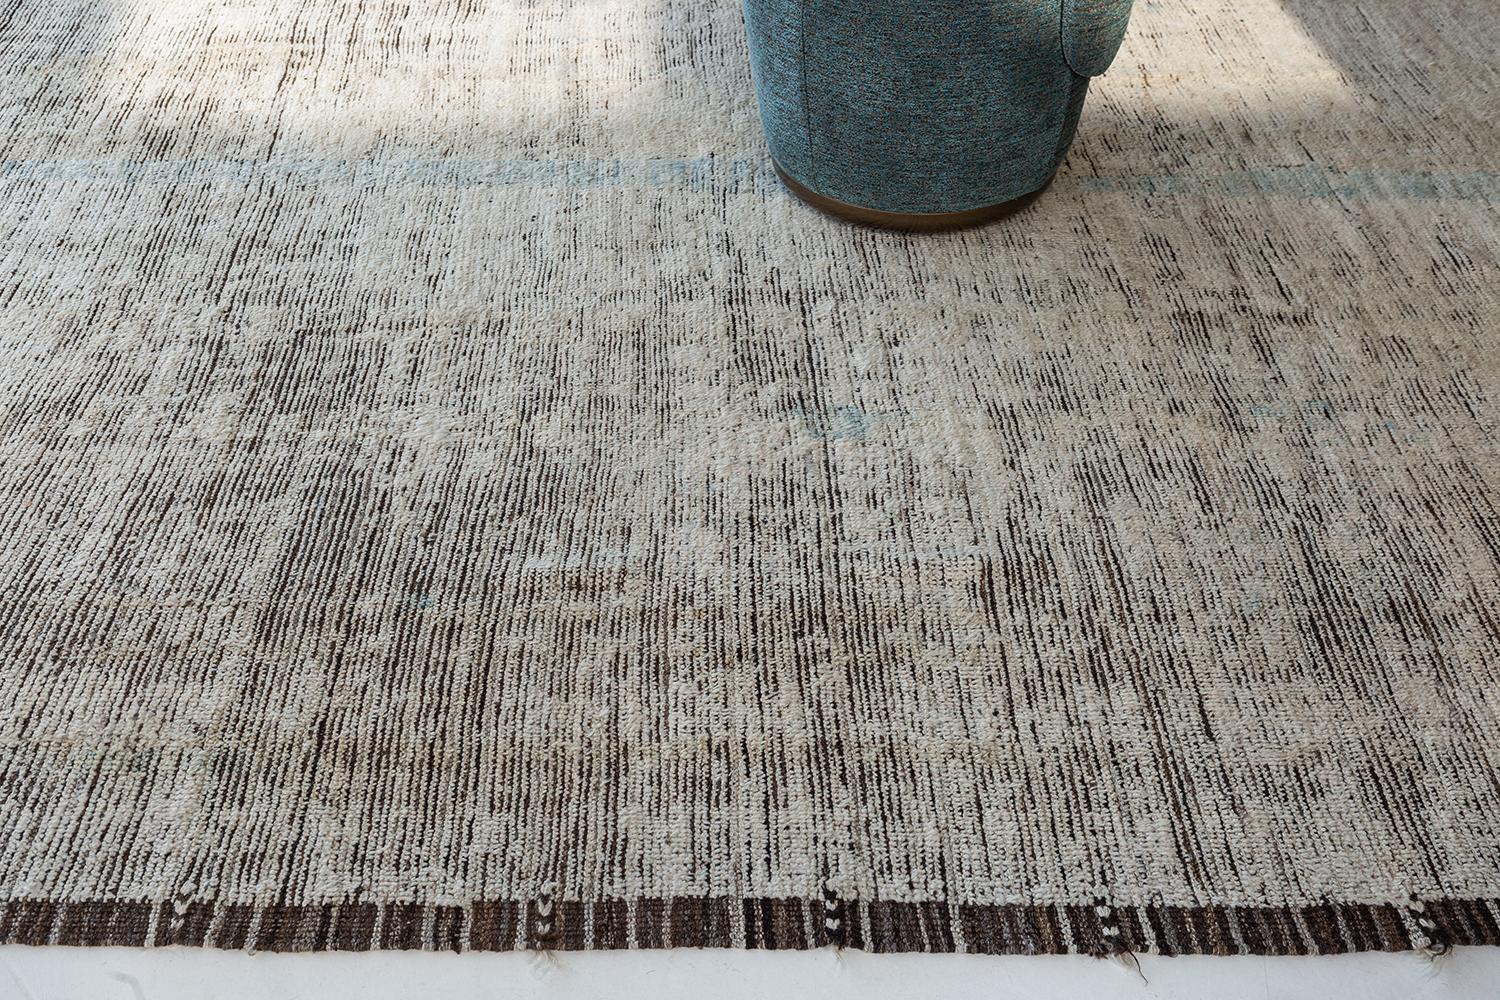 Berberis is an interplay between neutral tones and soothing muted colors into a modern-day interpretation of the Moroccan world. This rug's play of textures, linework, and simplicity is what makes the Atlas Collection so unique and sought after.